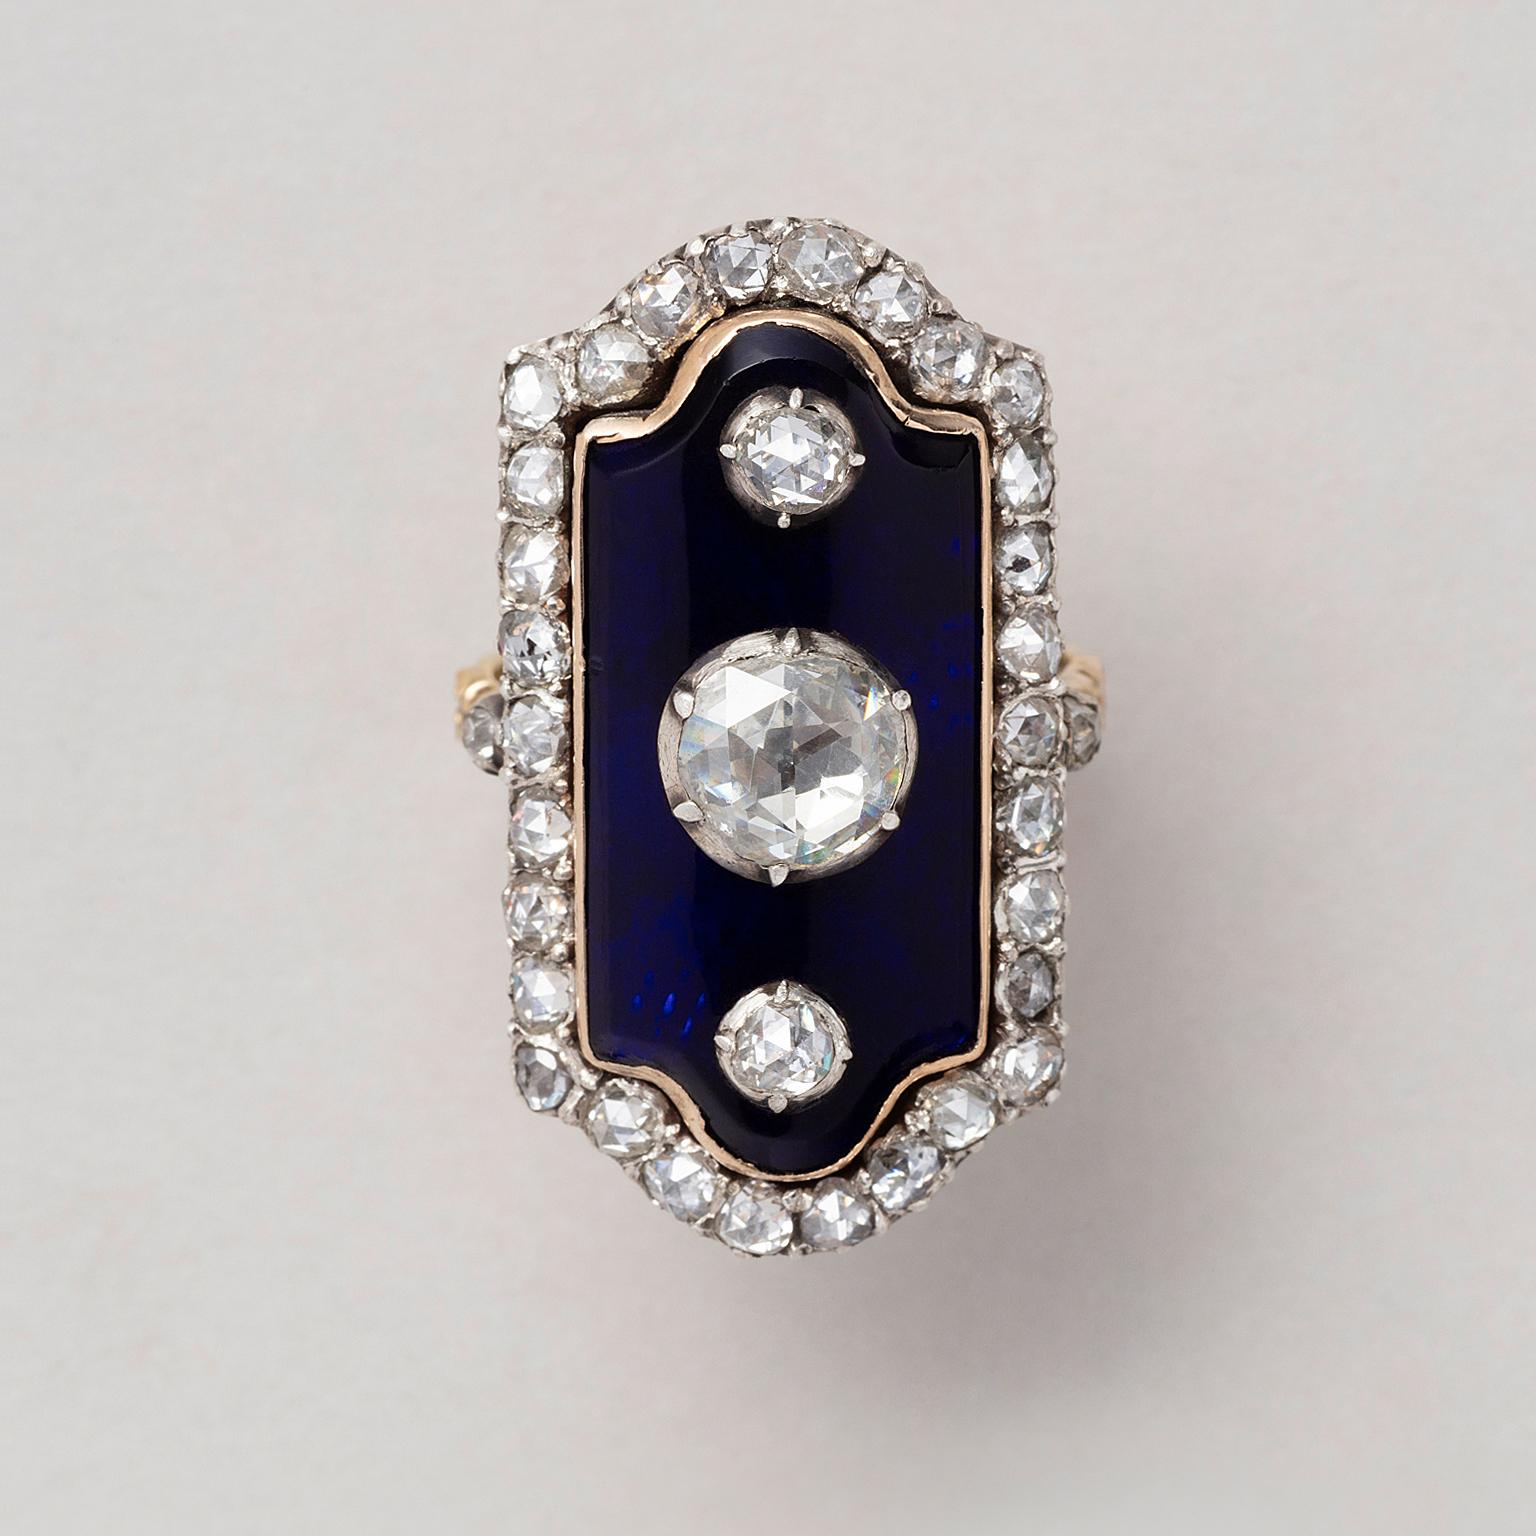 A 14 carat gold ‘au Firmament’ ring set with an octagonal blue glass panel the bottom and top are cuvred like a clock gable set with three central cushion cut diamonds, the center stone larger (0.75 ct.) with a border of rose cut diamonds, European,